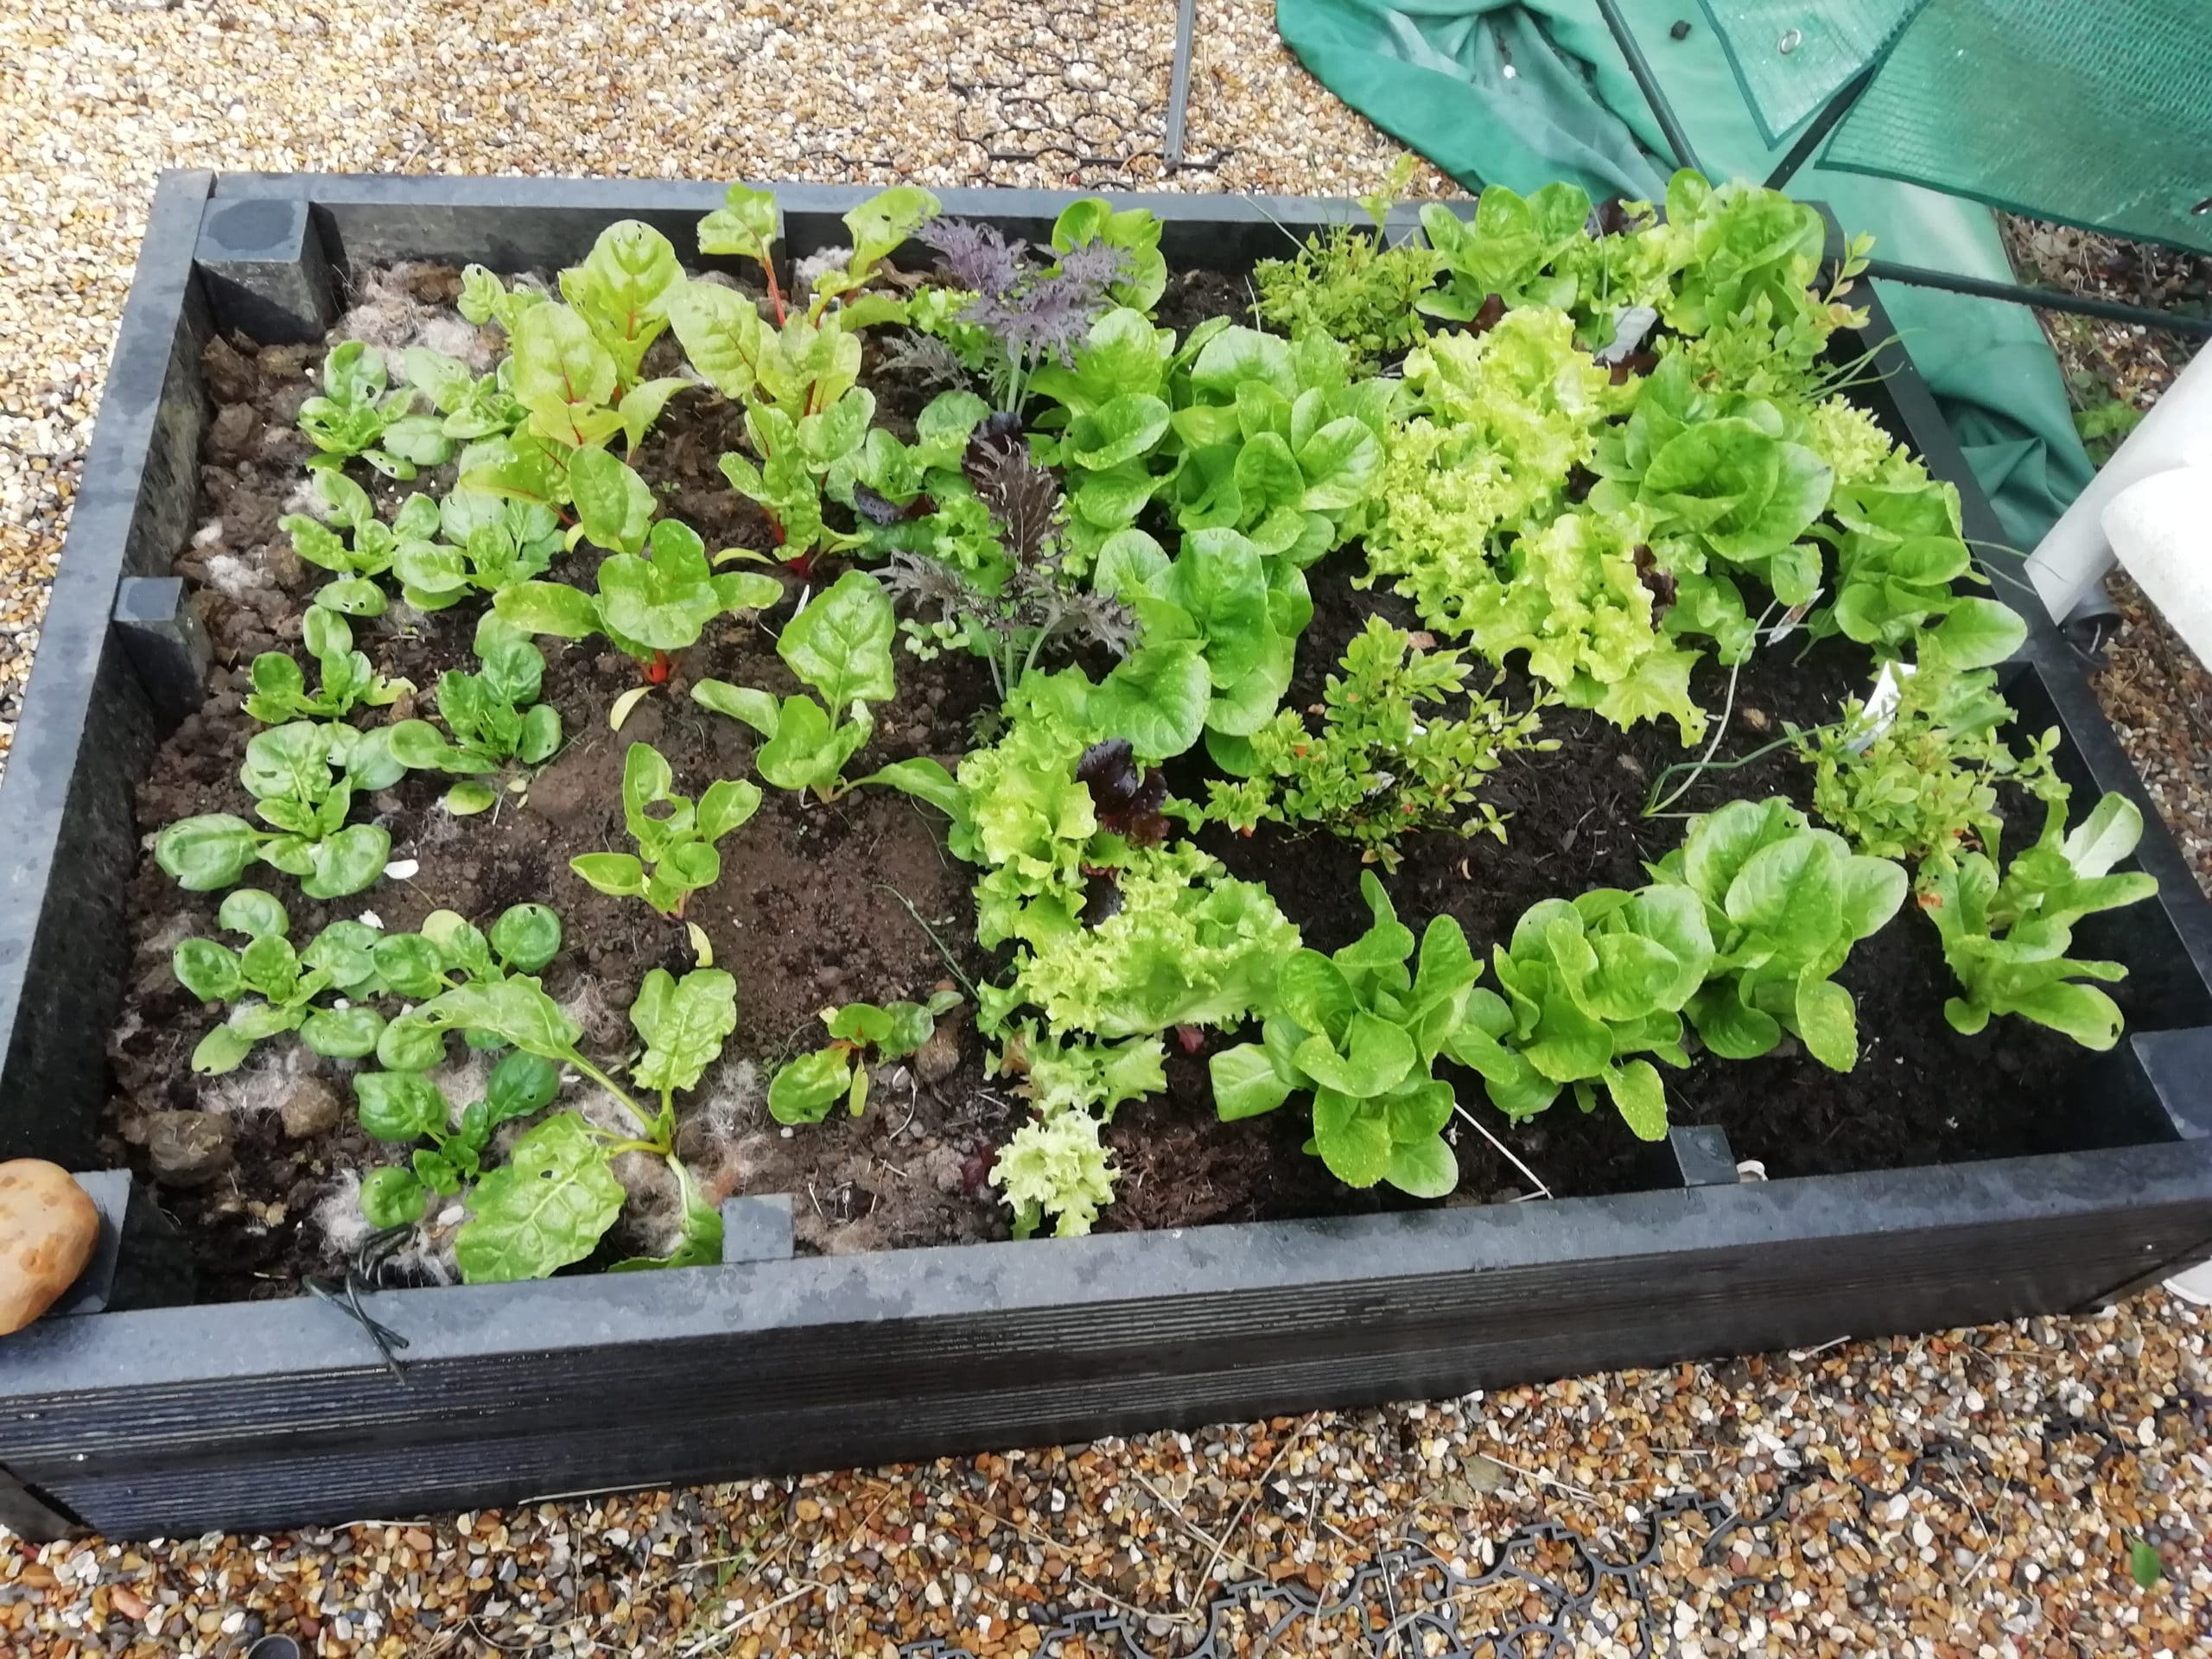 Growing veg in recycled plastic raised beds